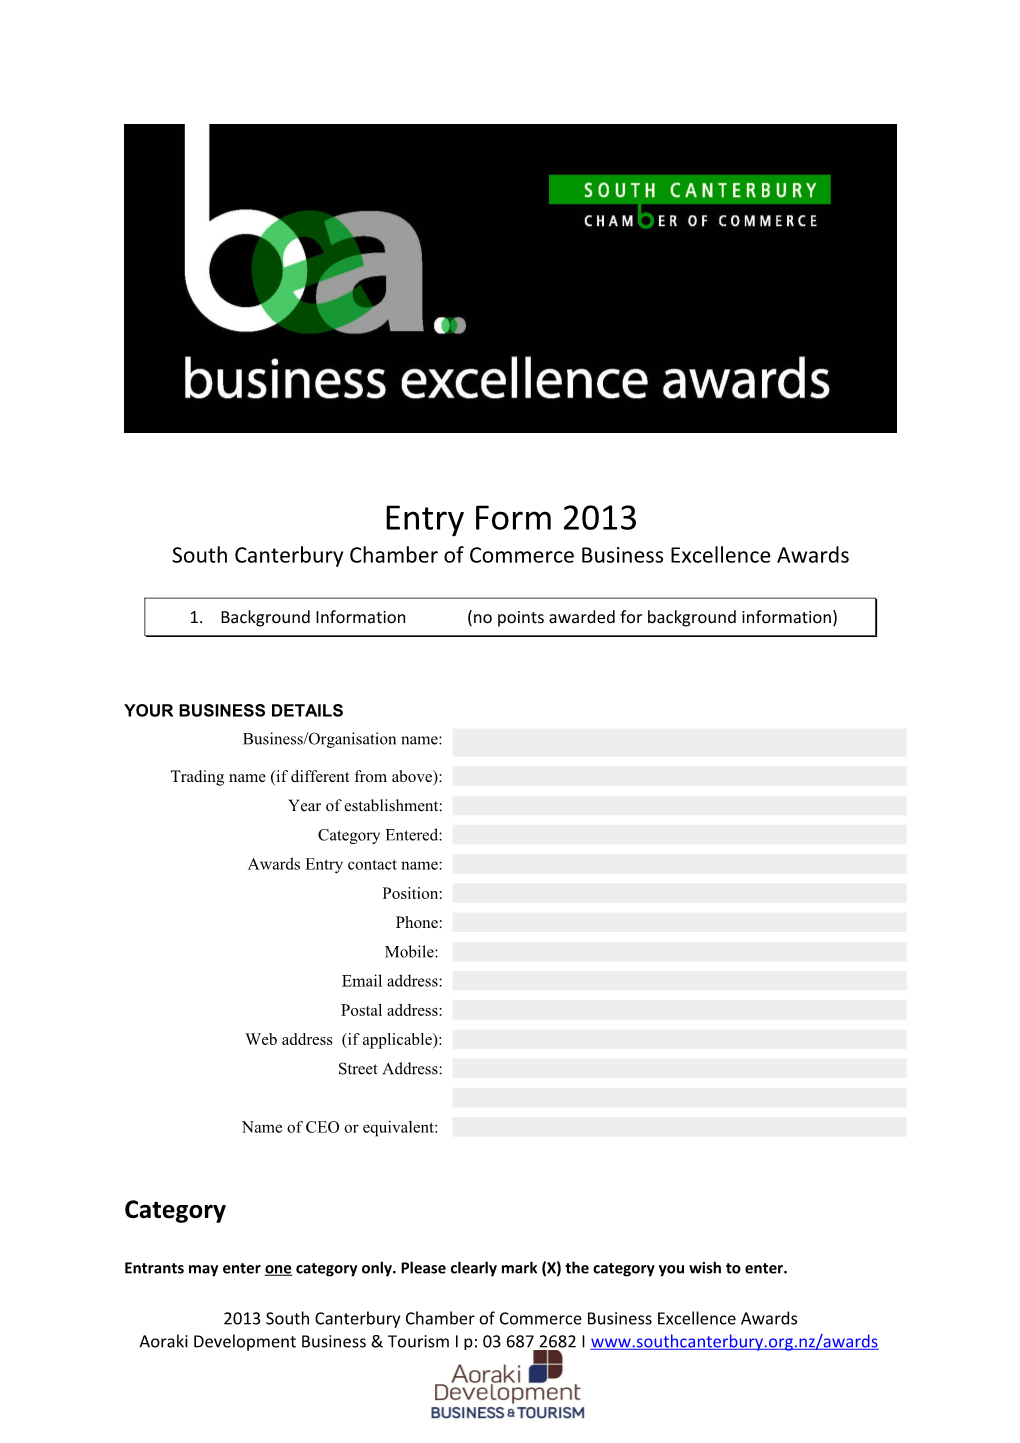 South Canterbury Chamber of Commerce Business Excellence Awards